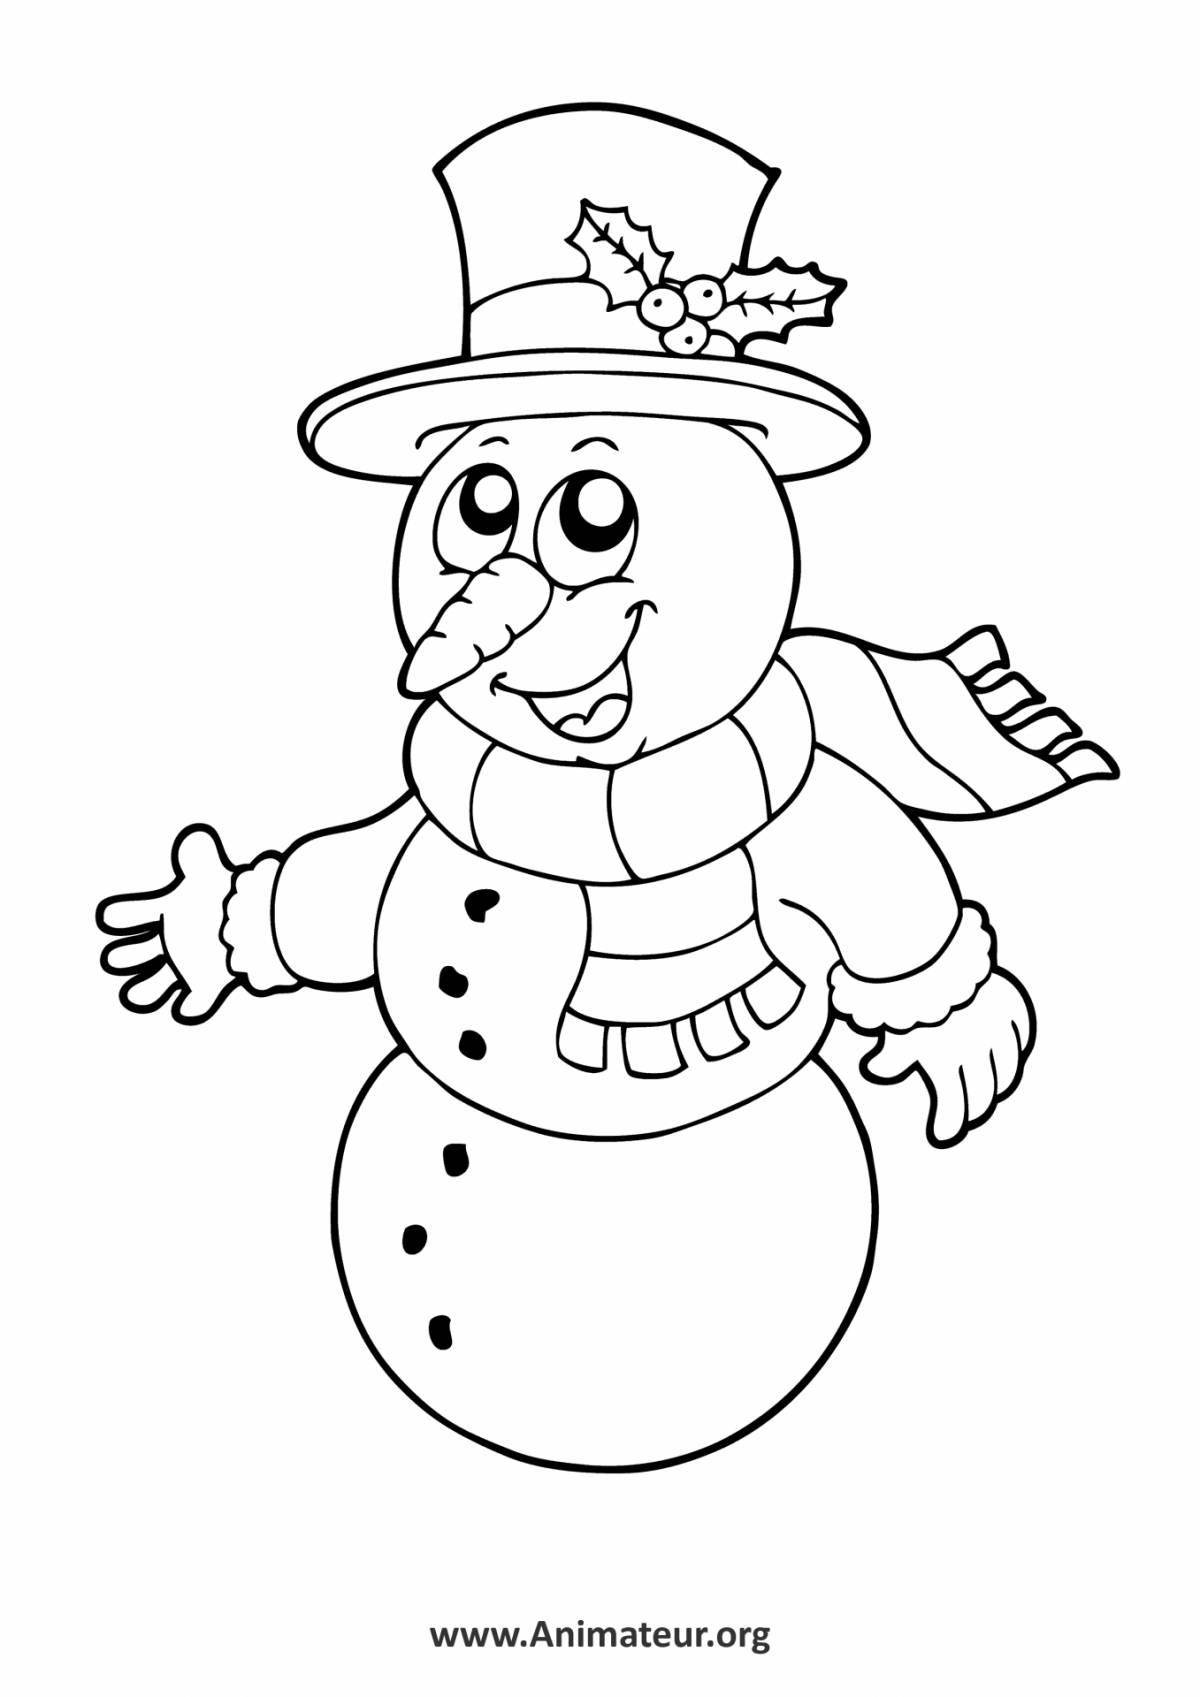 Radiant coloring page ice skating snowman